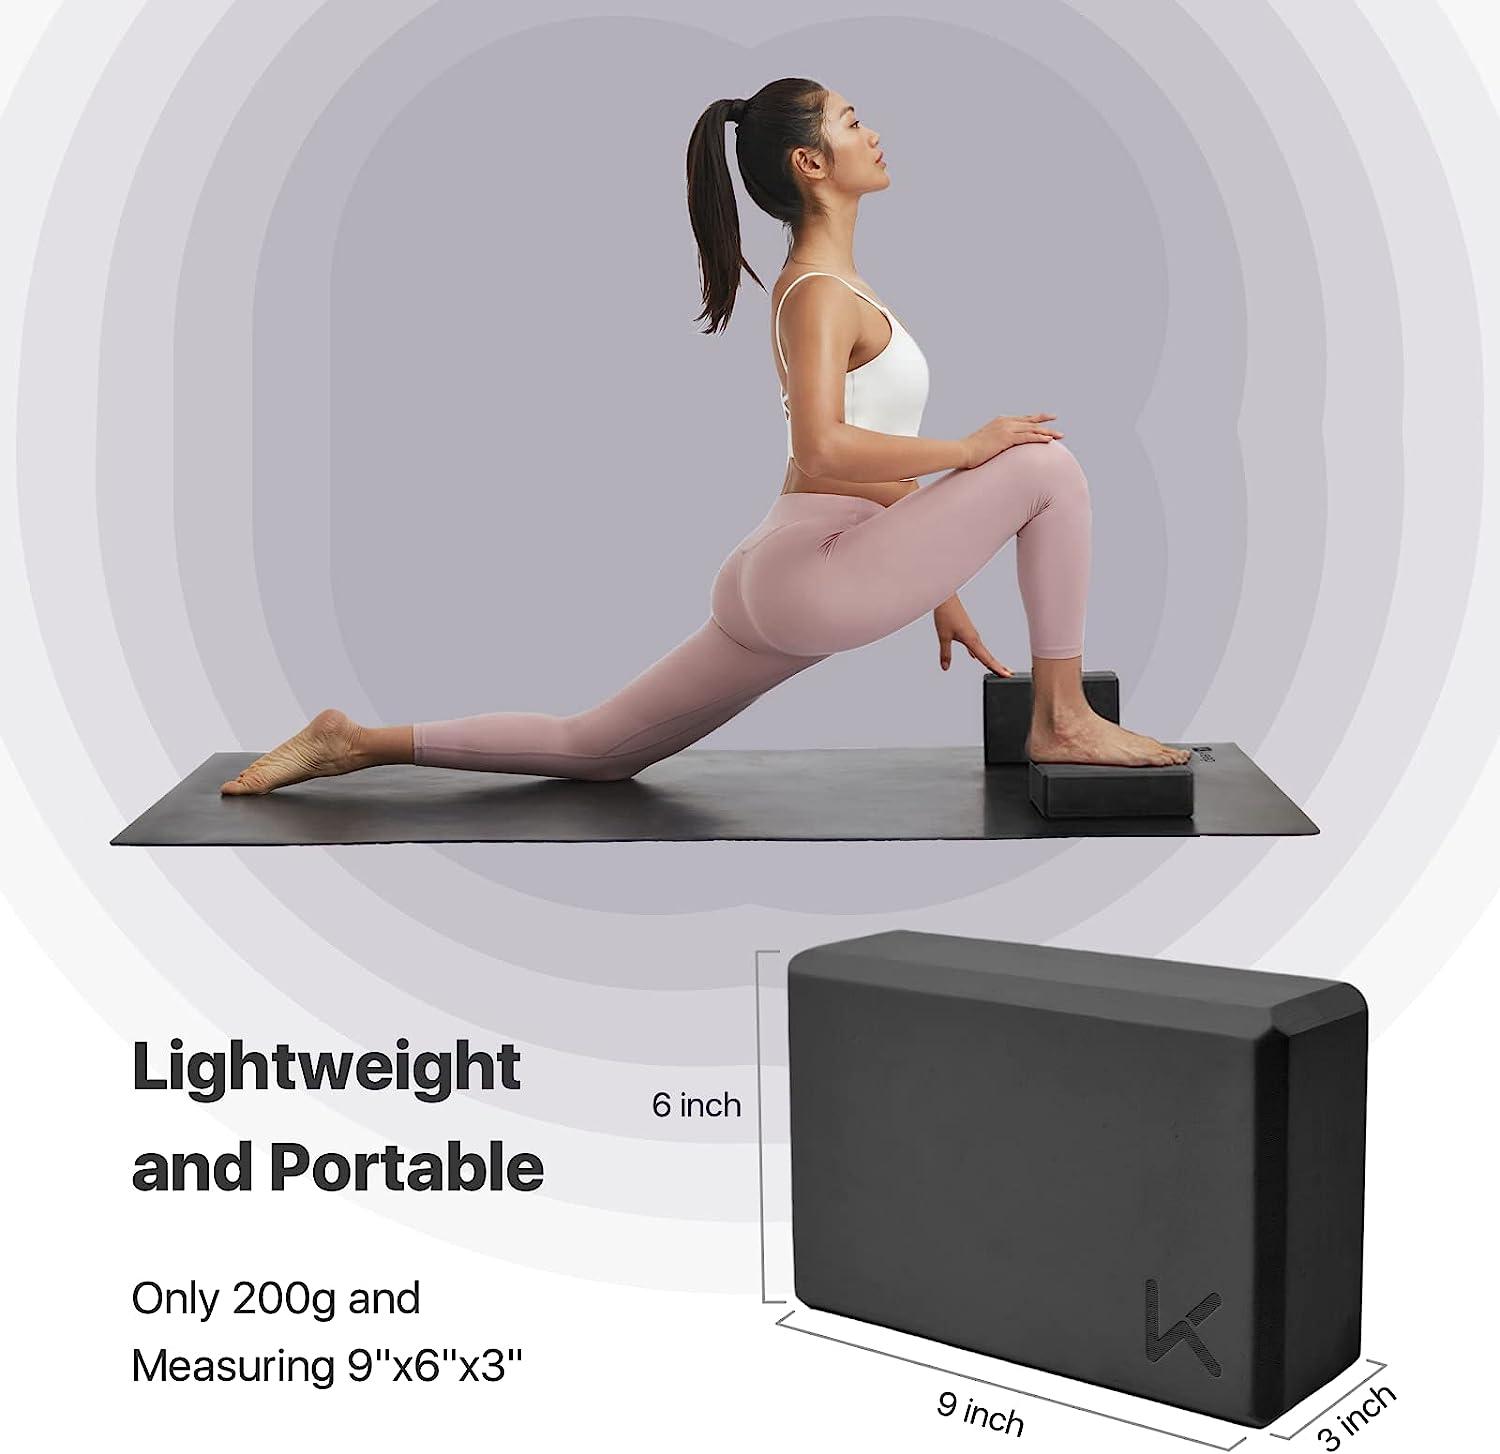 REEHUT Yoga Blocks 1-PC/ 2-PC, High Density EVA Foam Blocks to Support and  Deepen Poses, Improve Strength and Aid Balance and Flexibility -  Lightweight, Odor Resistant - Compleo Waco, LLC